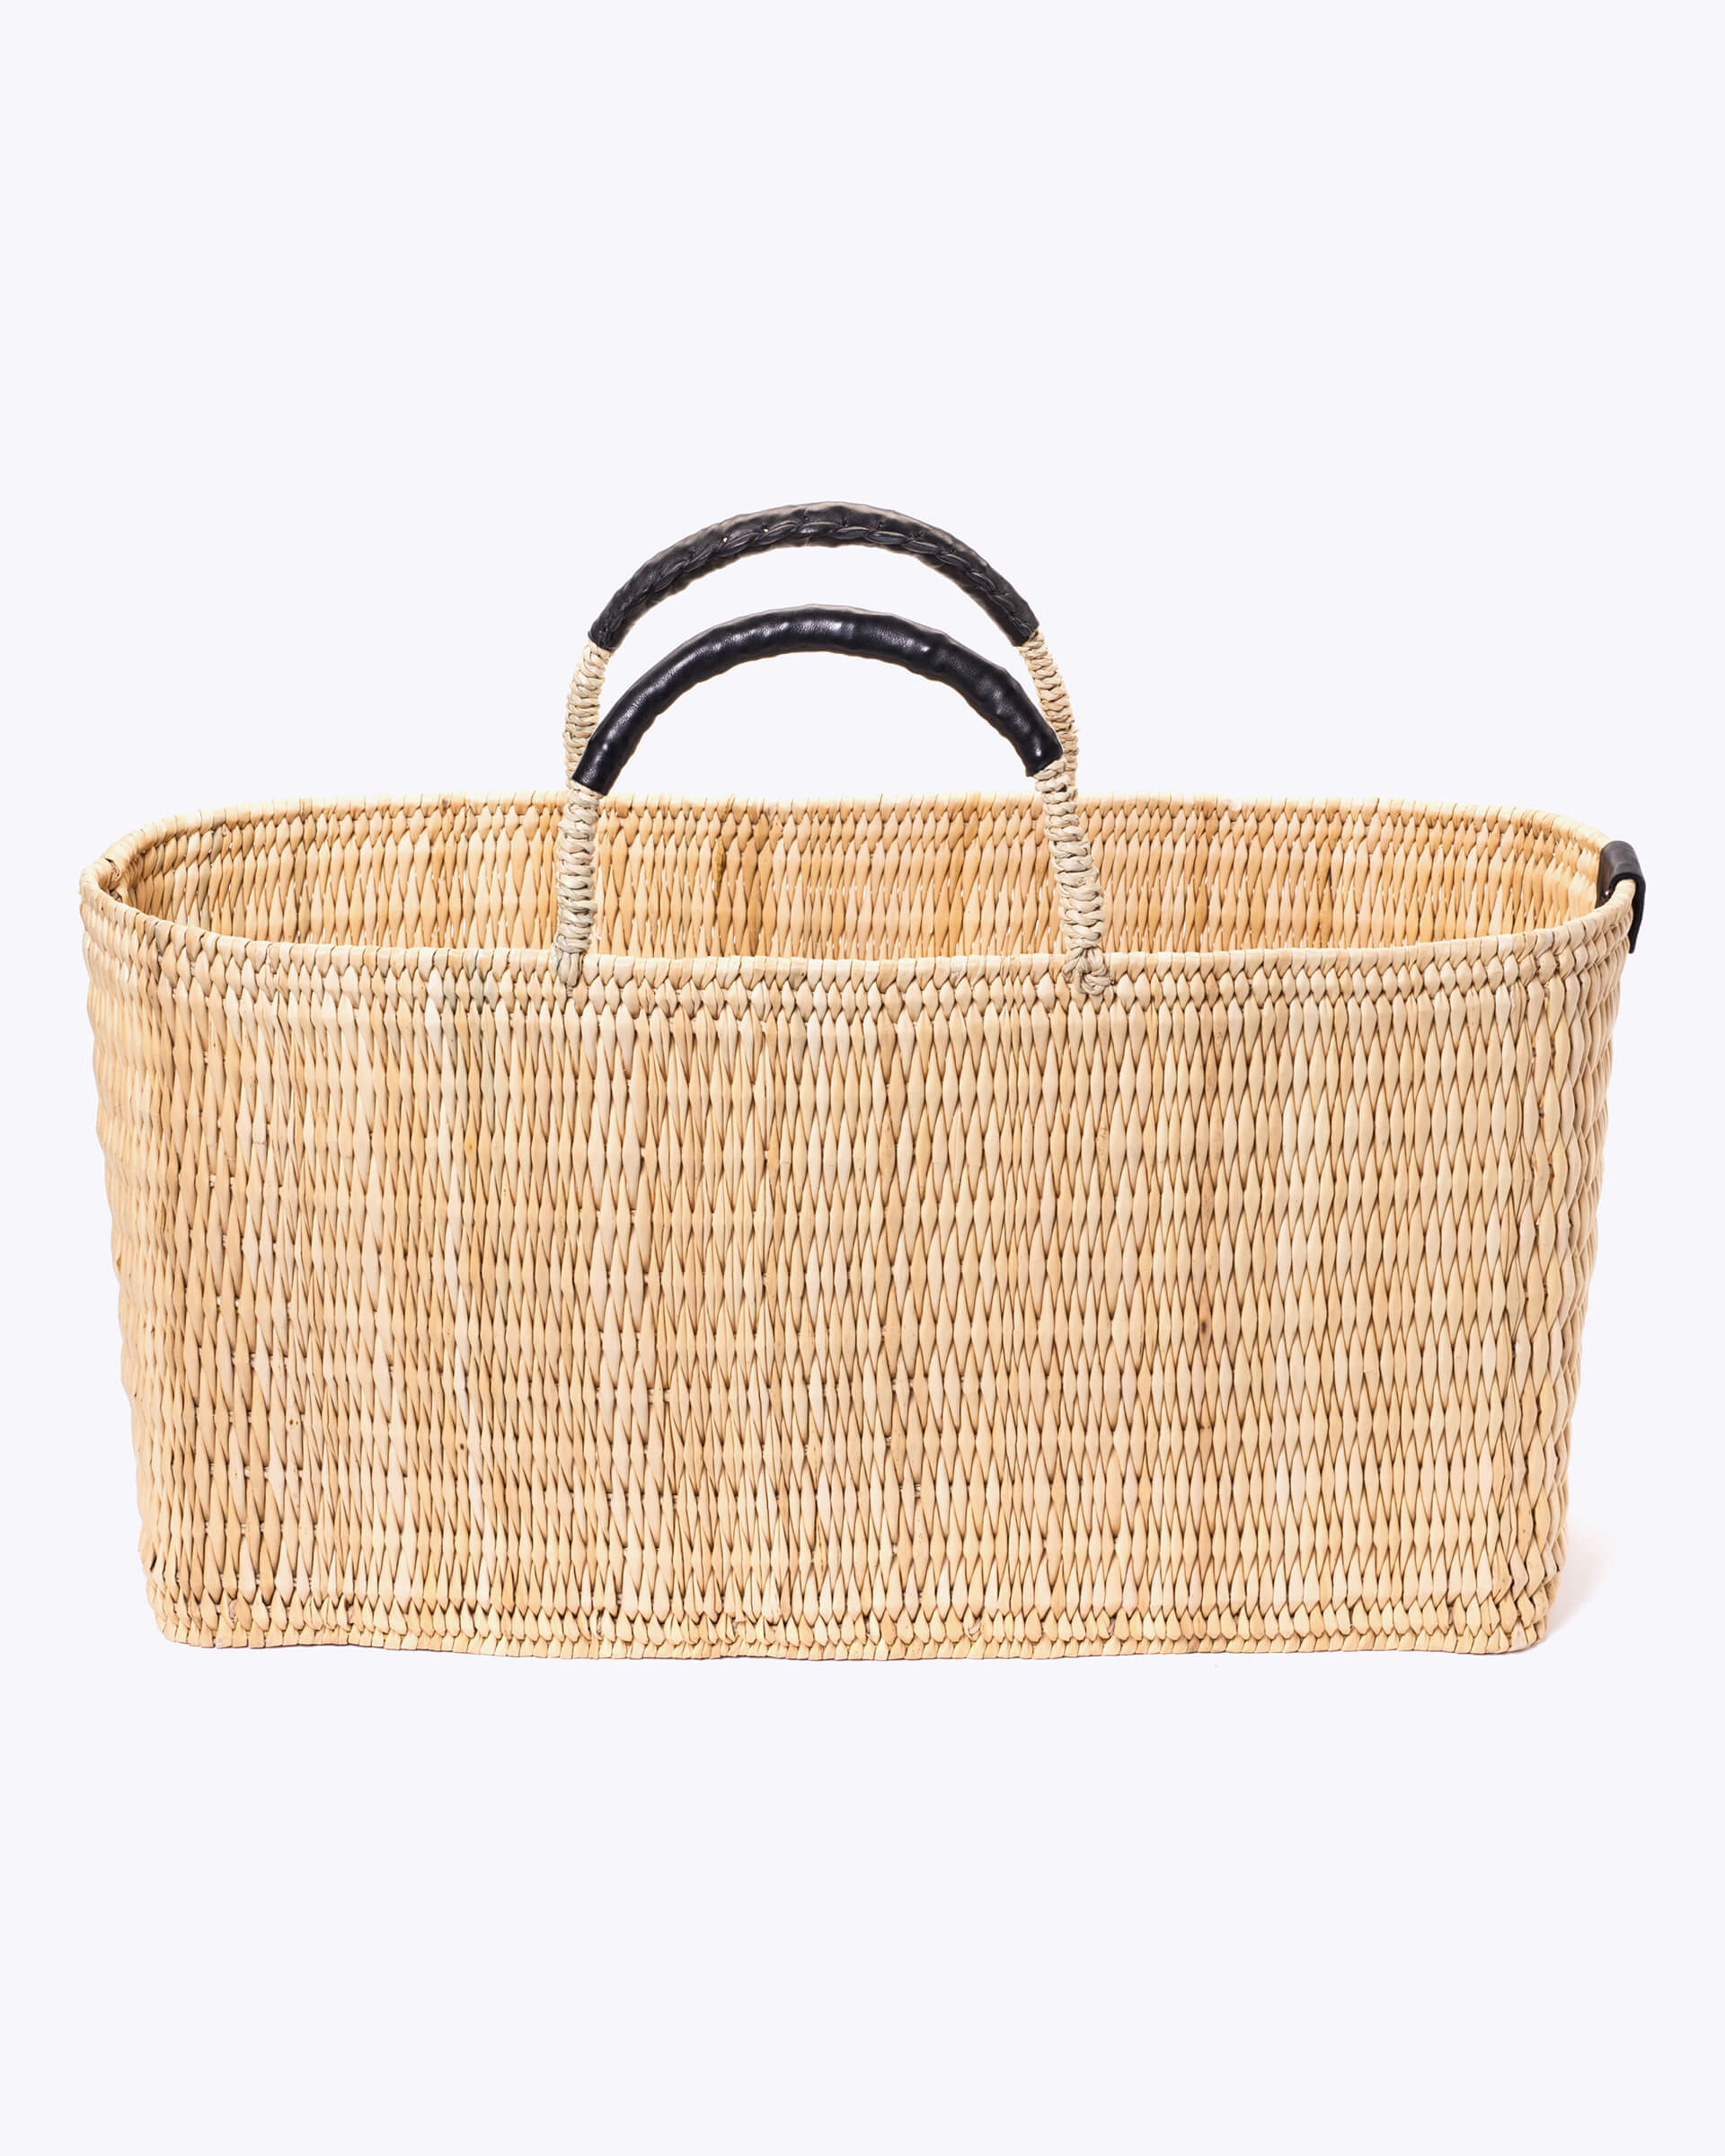 extra large straw basket wrapped with black leather handle on a white background 